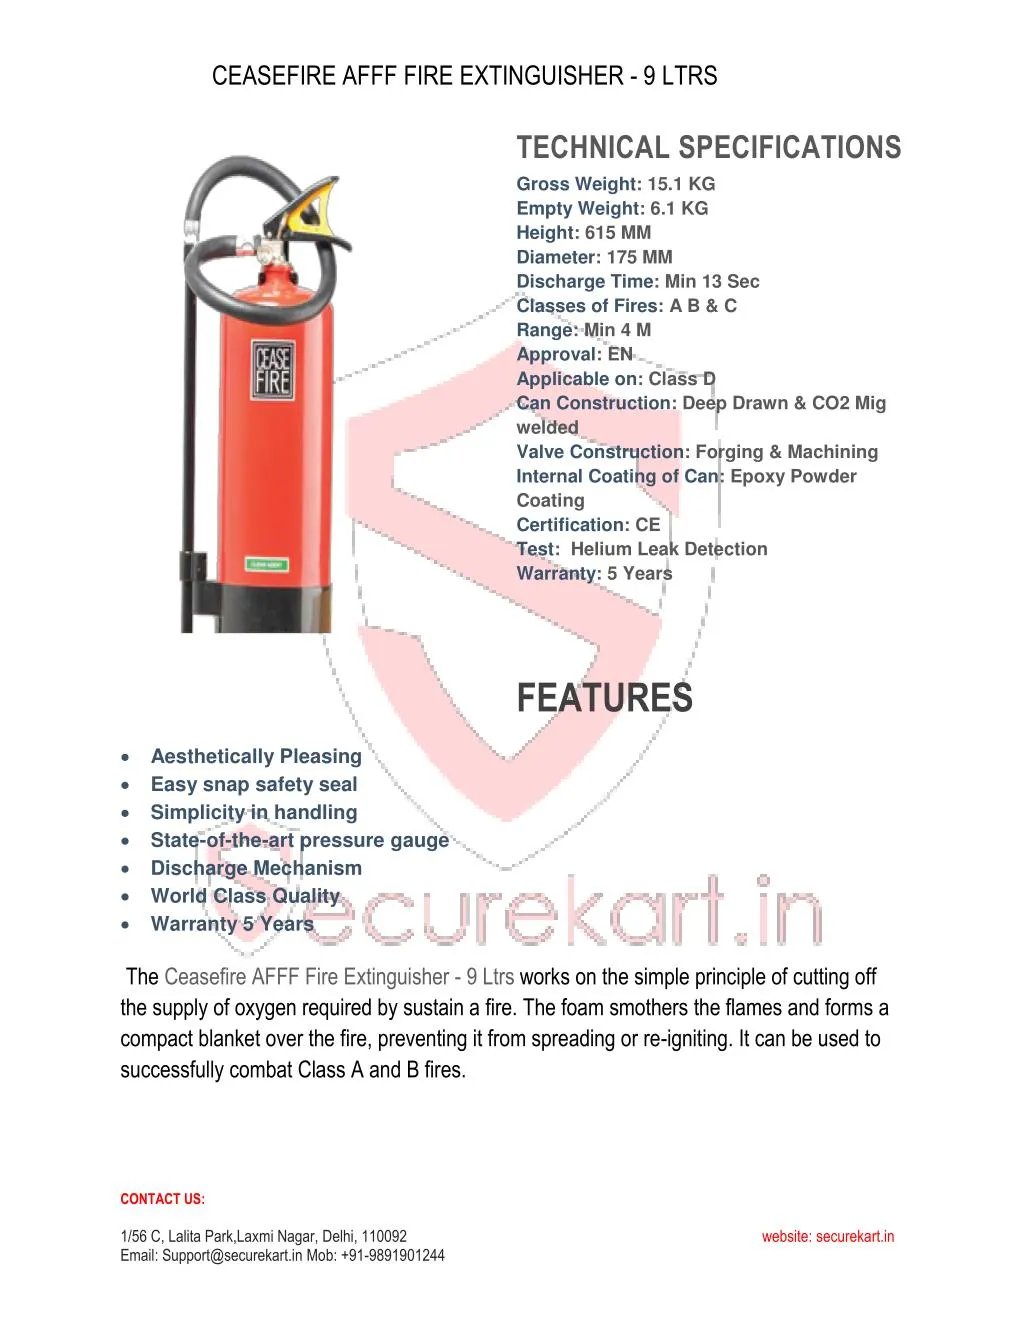 Ppt Features Of Ceasefire Fire Extinguisher Afff Foam 9 Itr Powerpoint Presentation Id 7456042